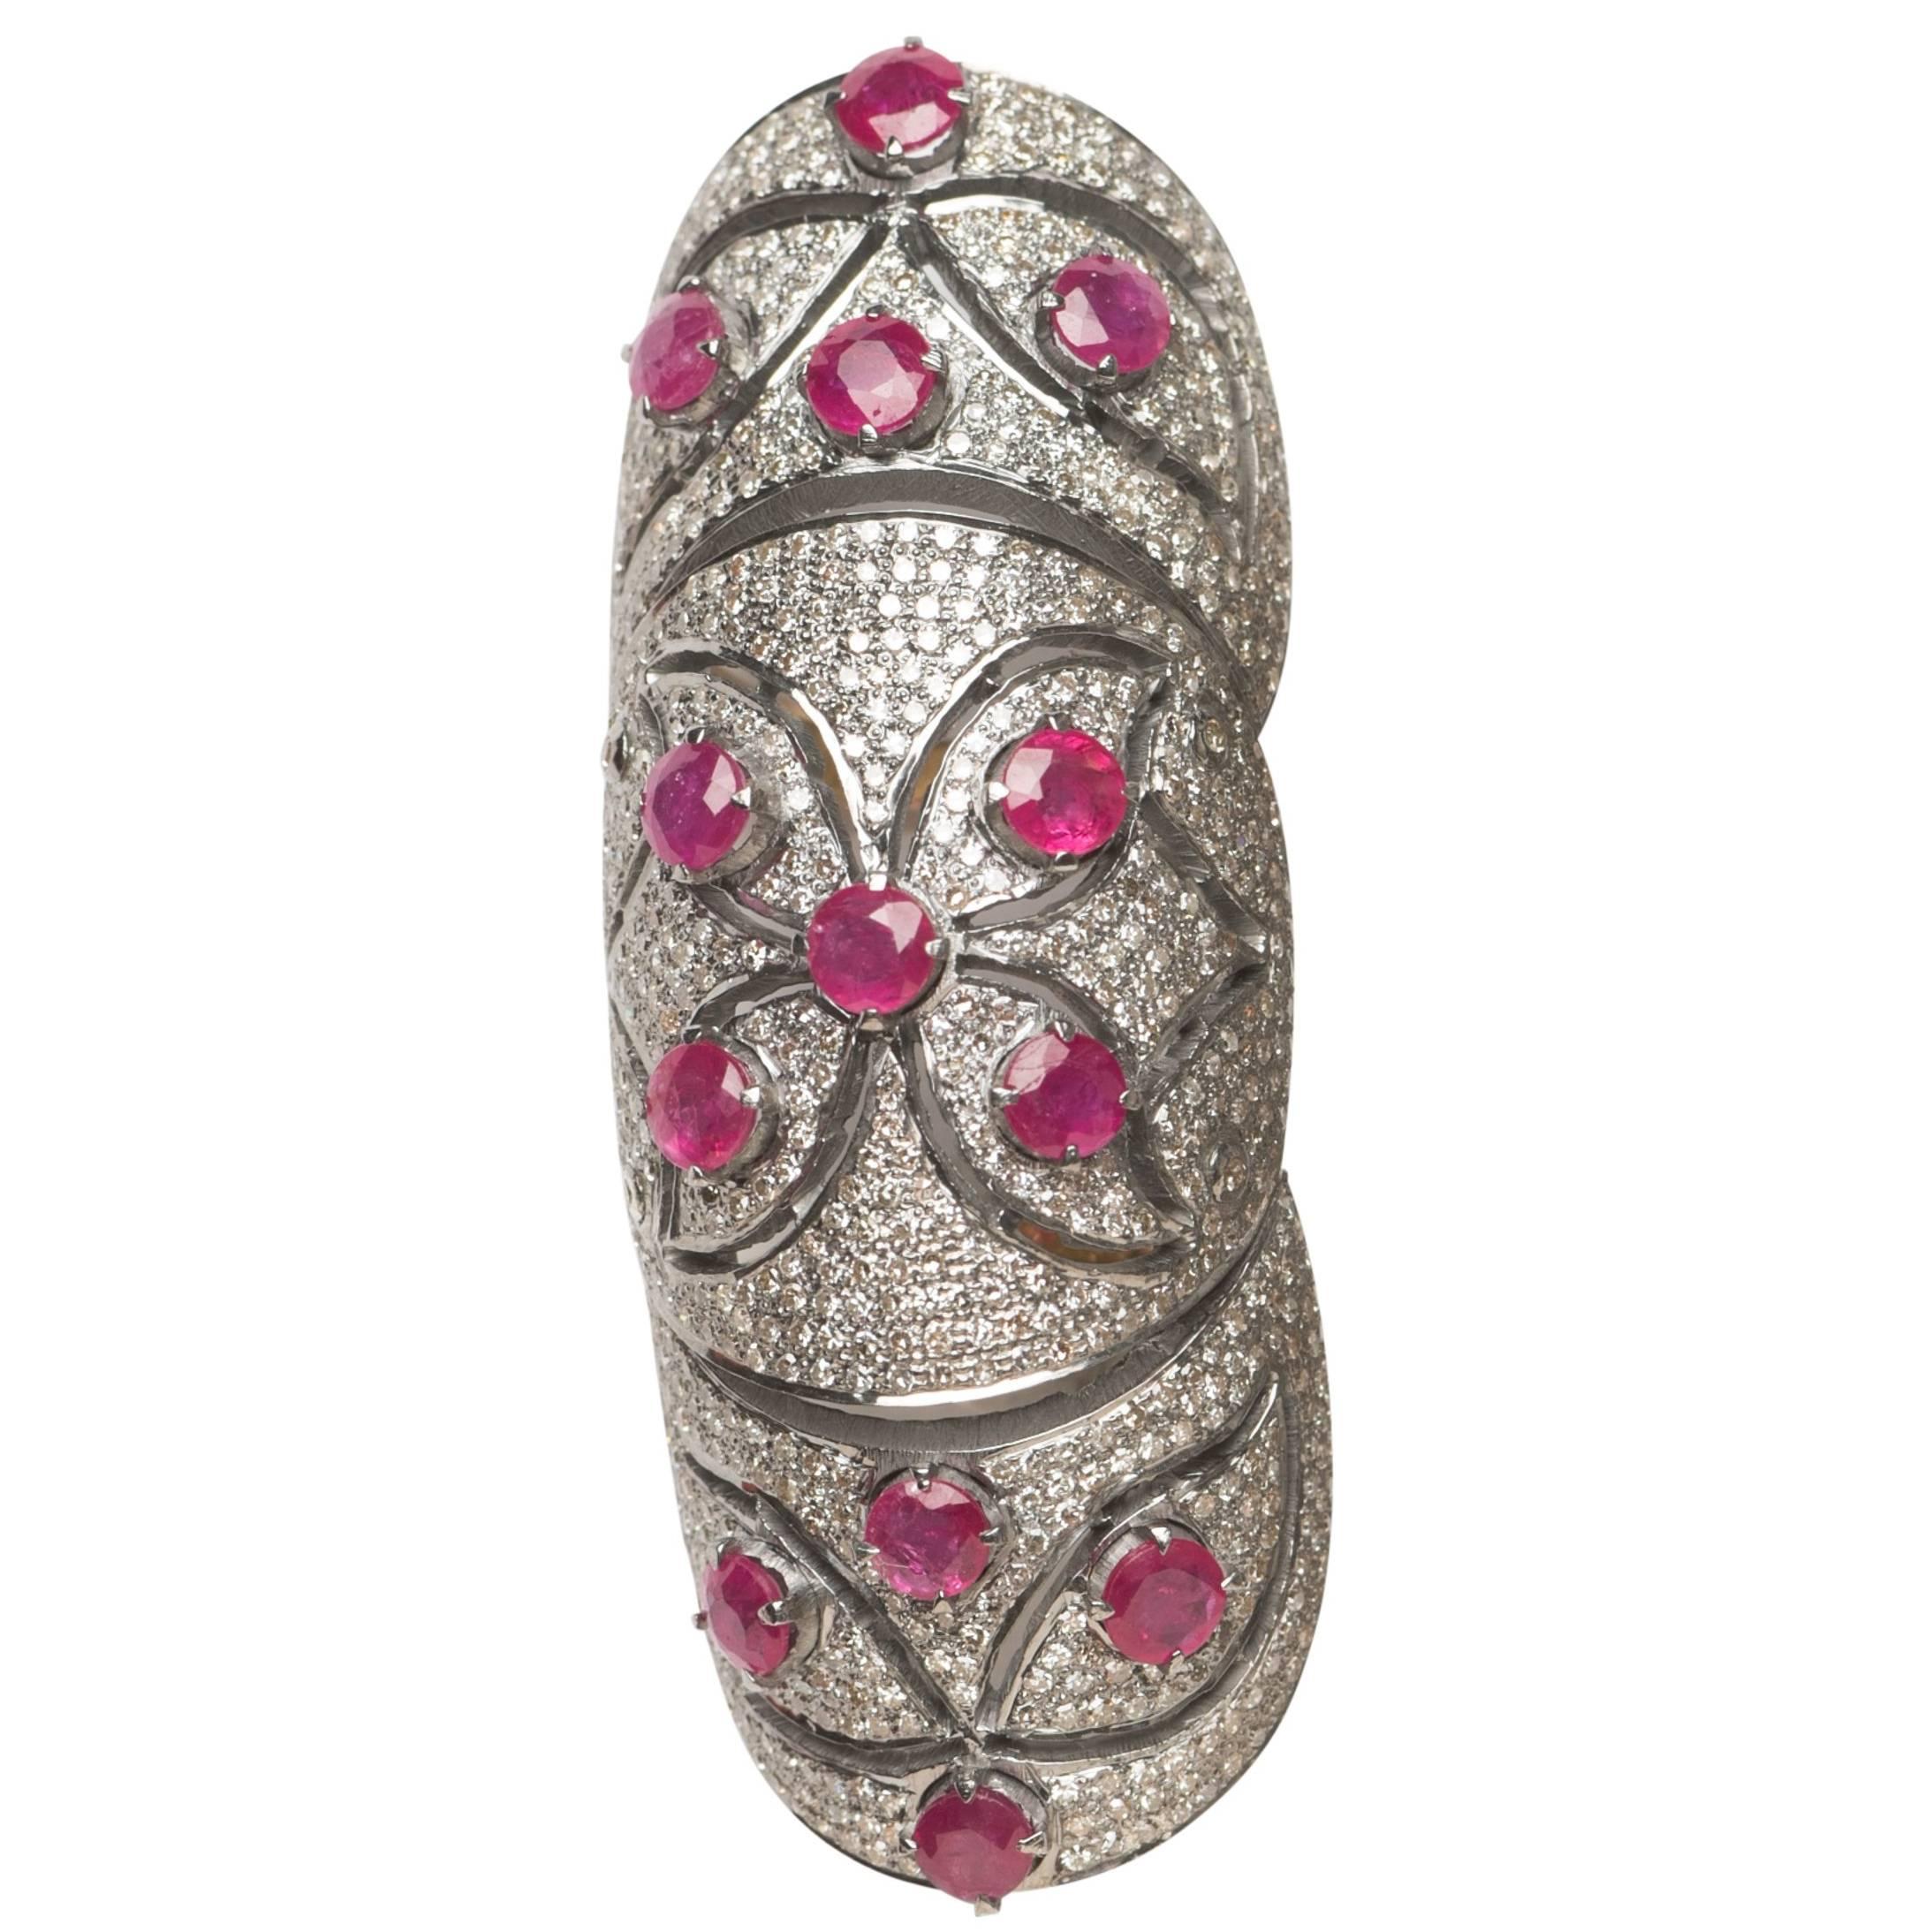 Clarissa Bronfman Diamond and Ruby 'Gladiator' Ring For Sale